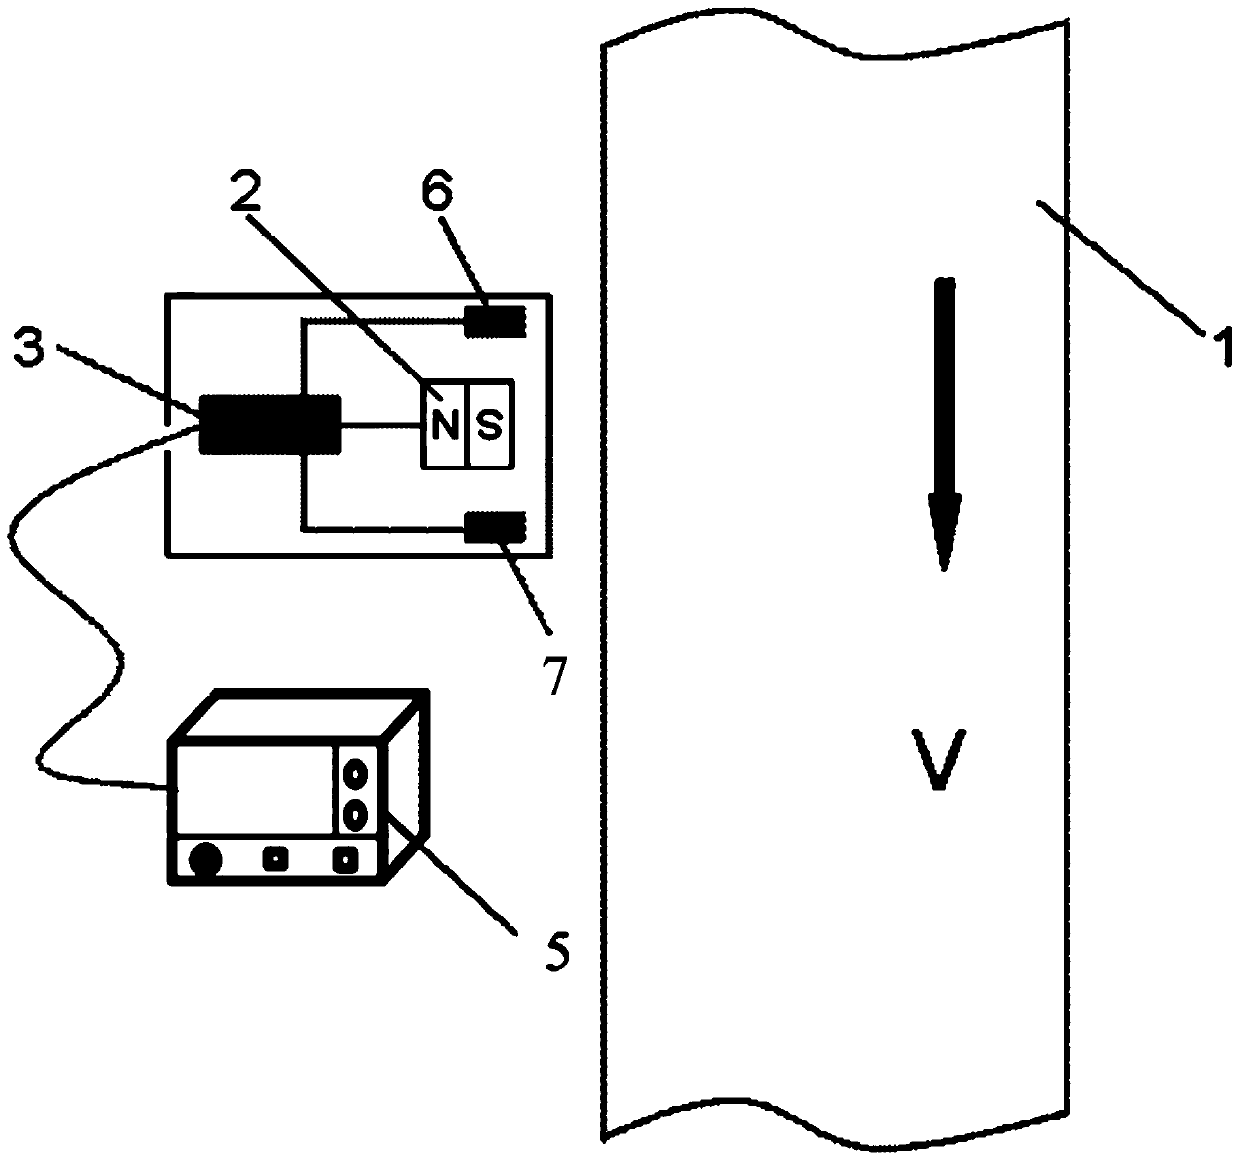 A static magnetostatic force method for online monitoring of vibration marks of magnetically conductive continuous casting billets